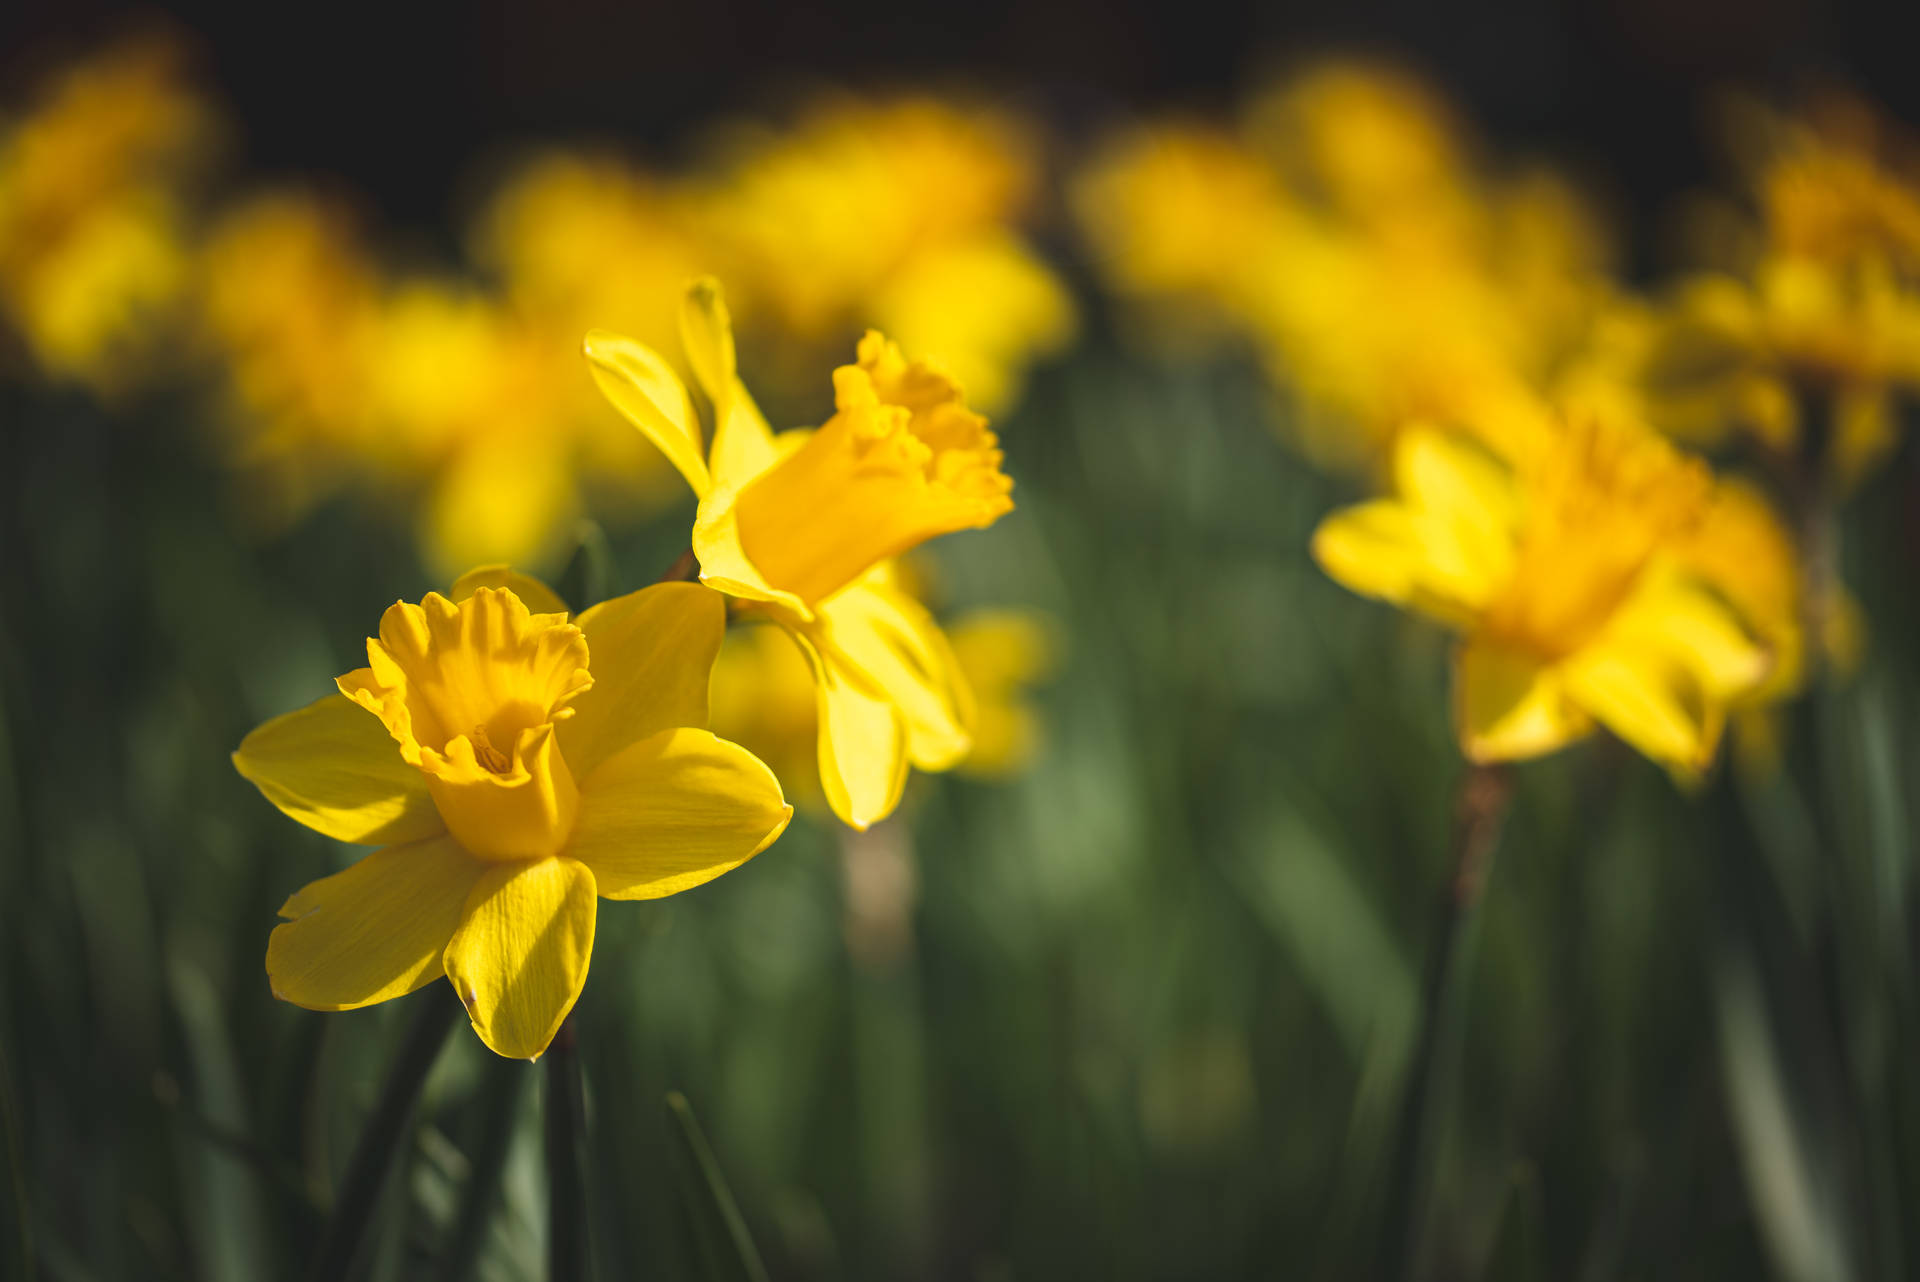 Yellow Daffodils During Daytime Background